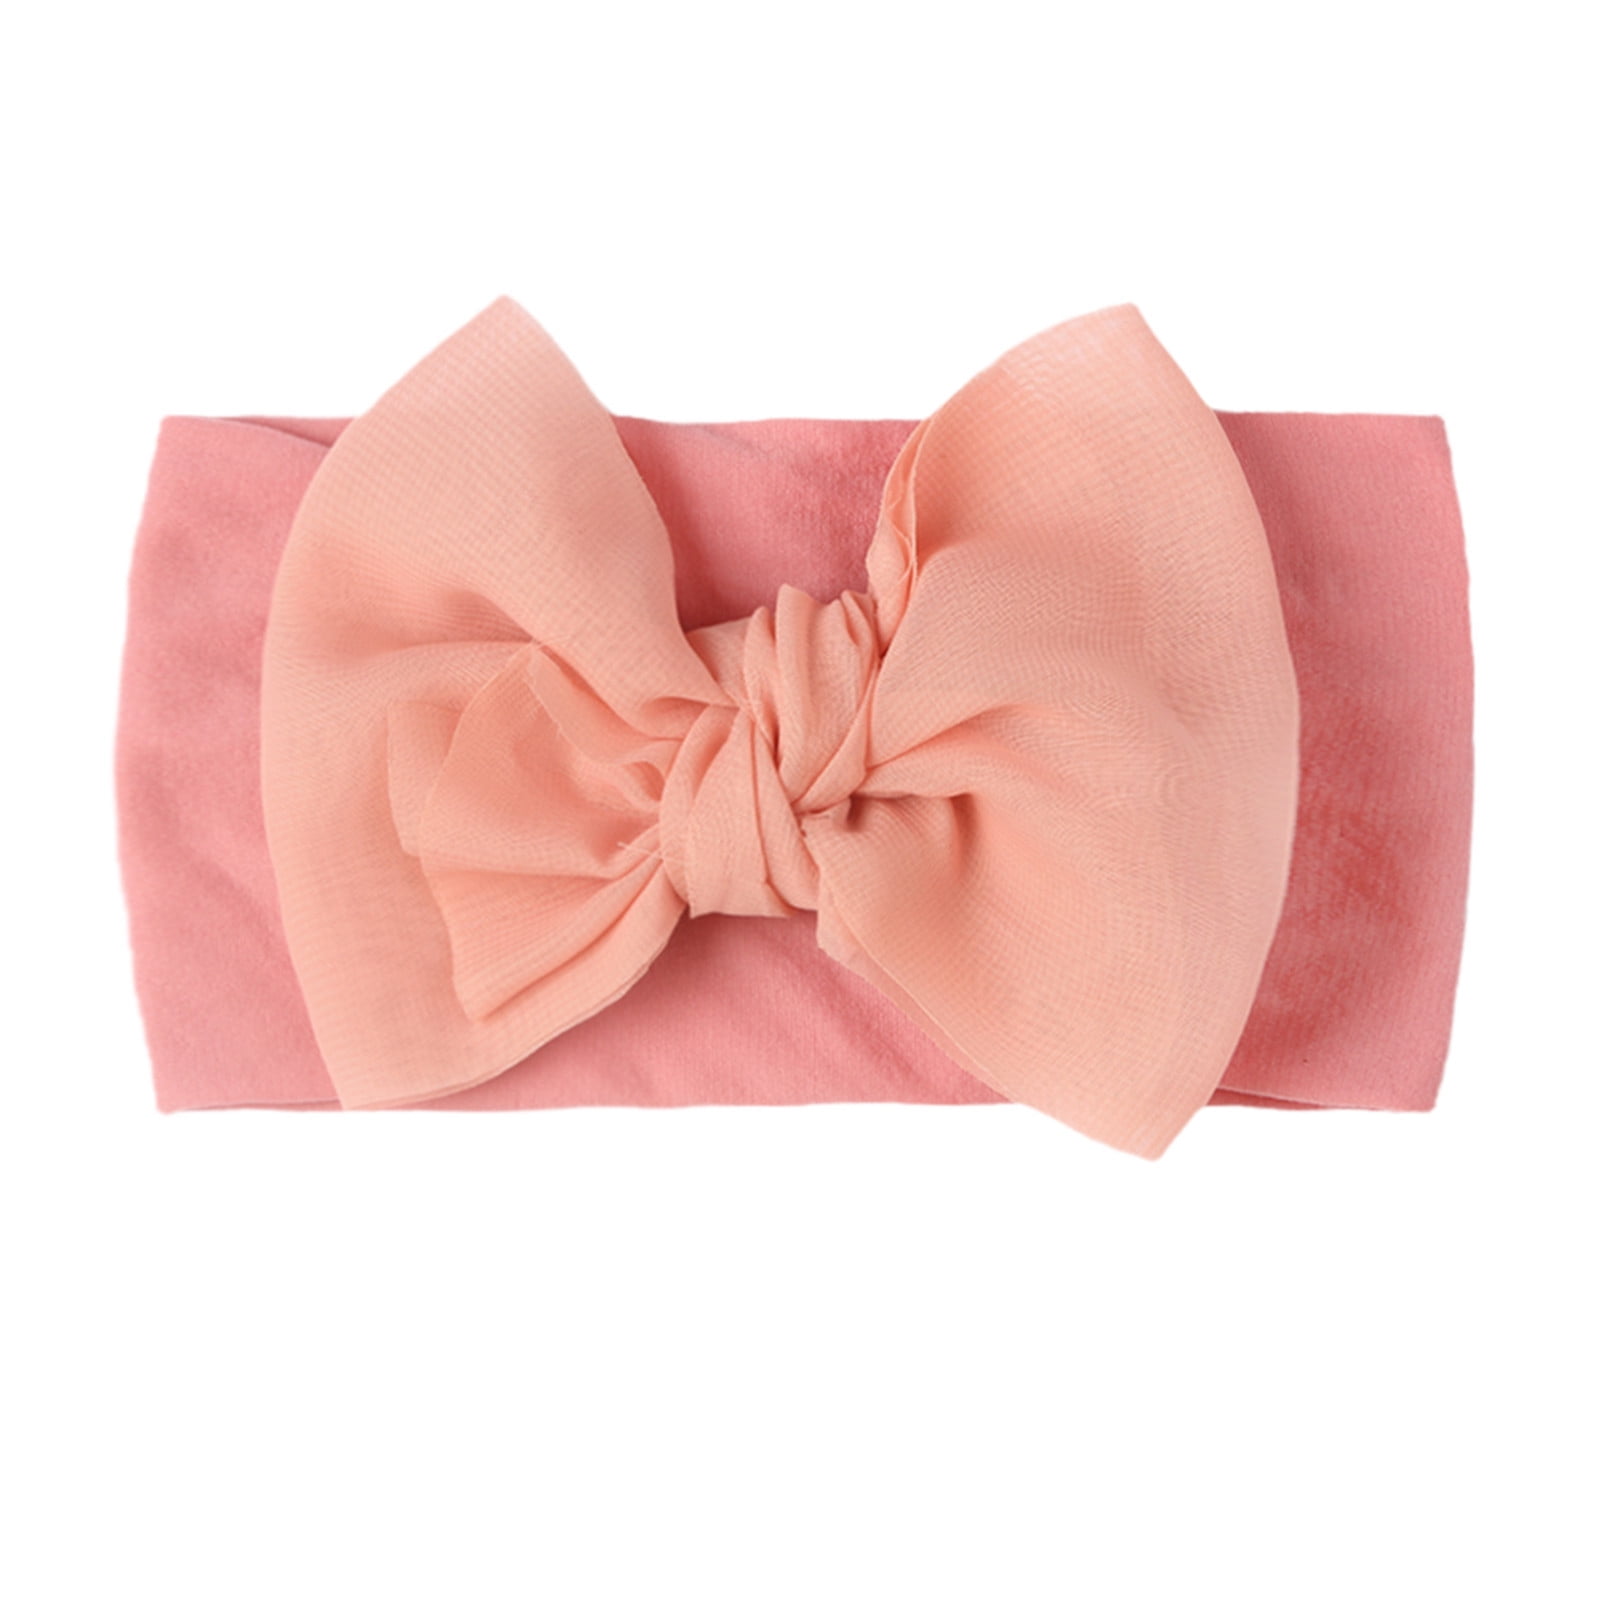 1PC Hairband Baby Headband Solid Headwear Stretch Bow Girls Kids Hair  accessories Fun Gift for 8 Year Old Girl 